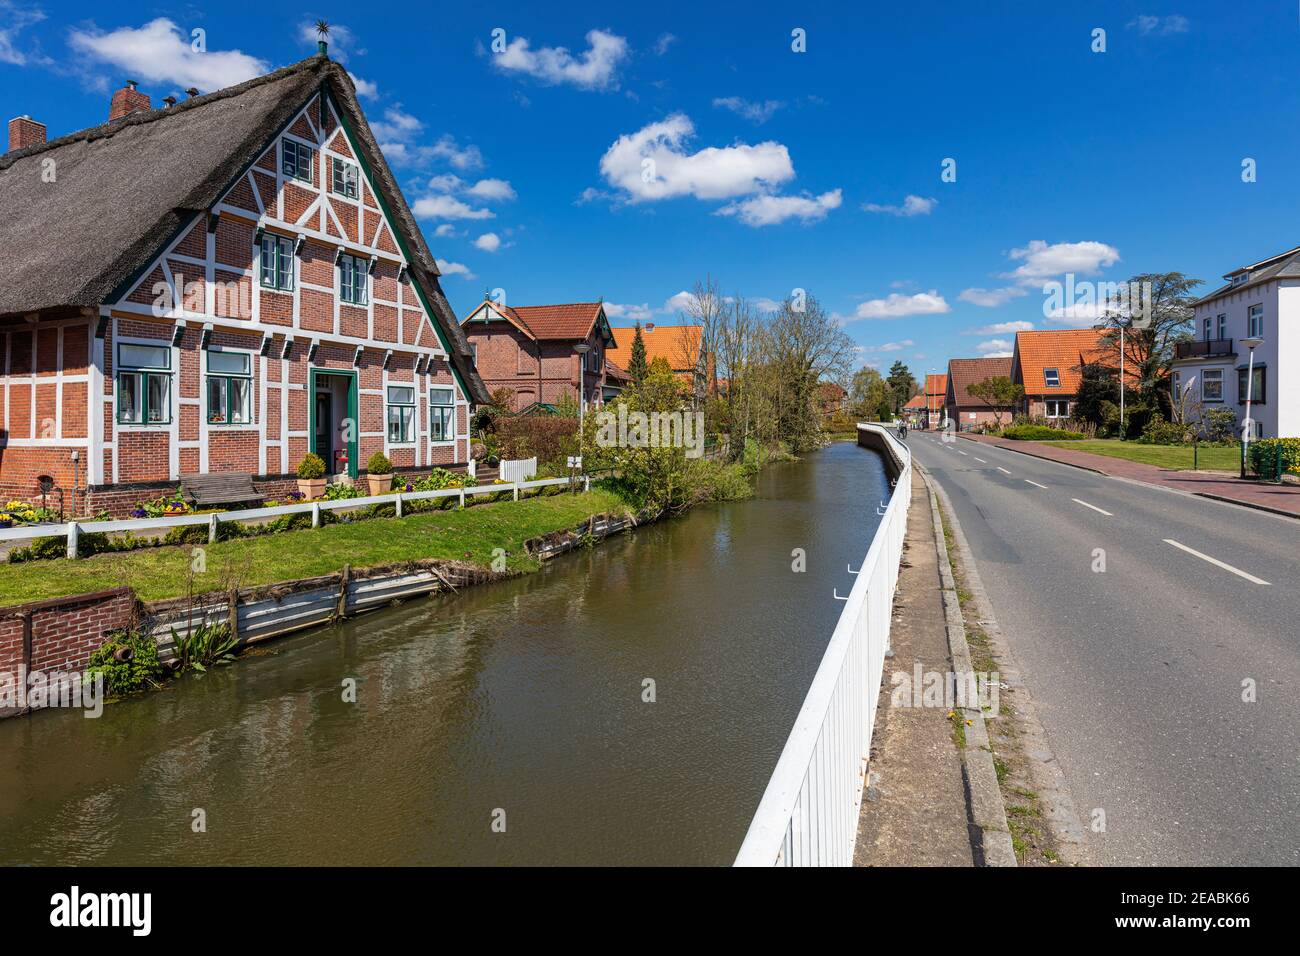 Water course, Jorker 'main weather', towards Borstel, Altes Land, Stade district, Lower Saxony, Stock Photo